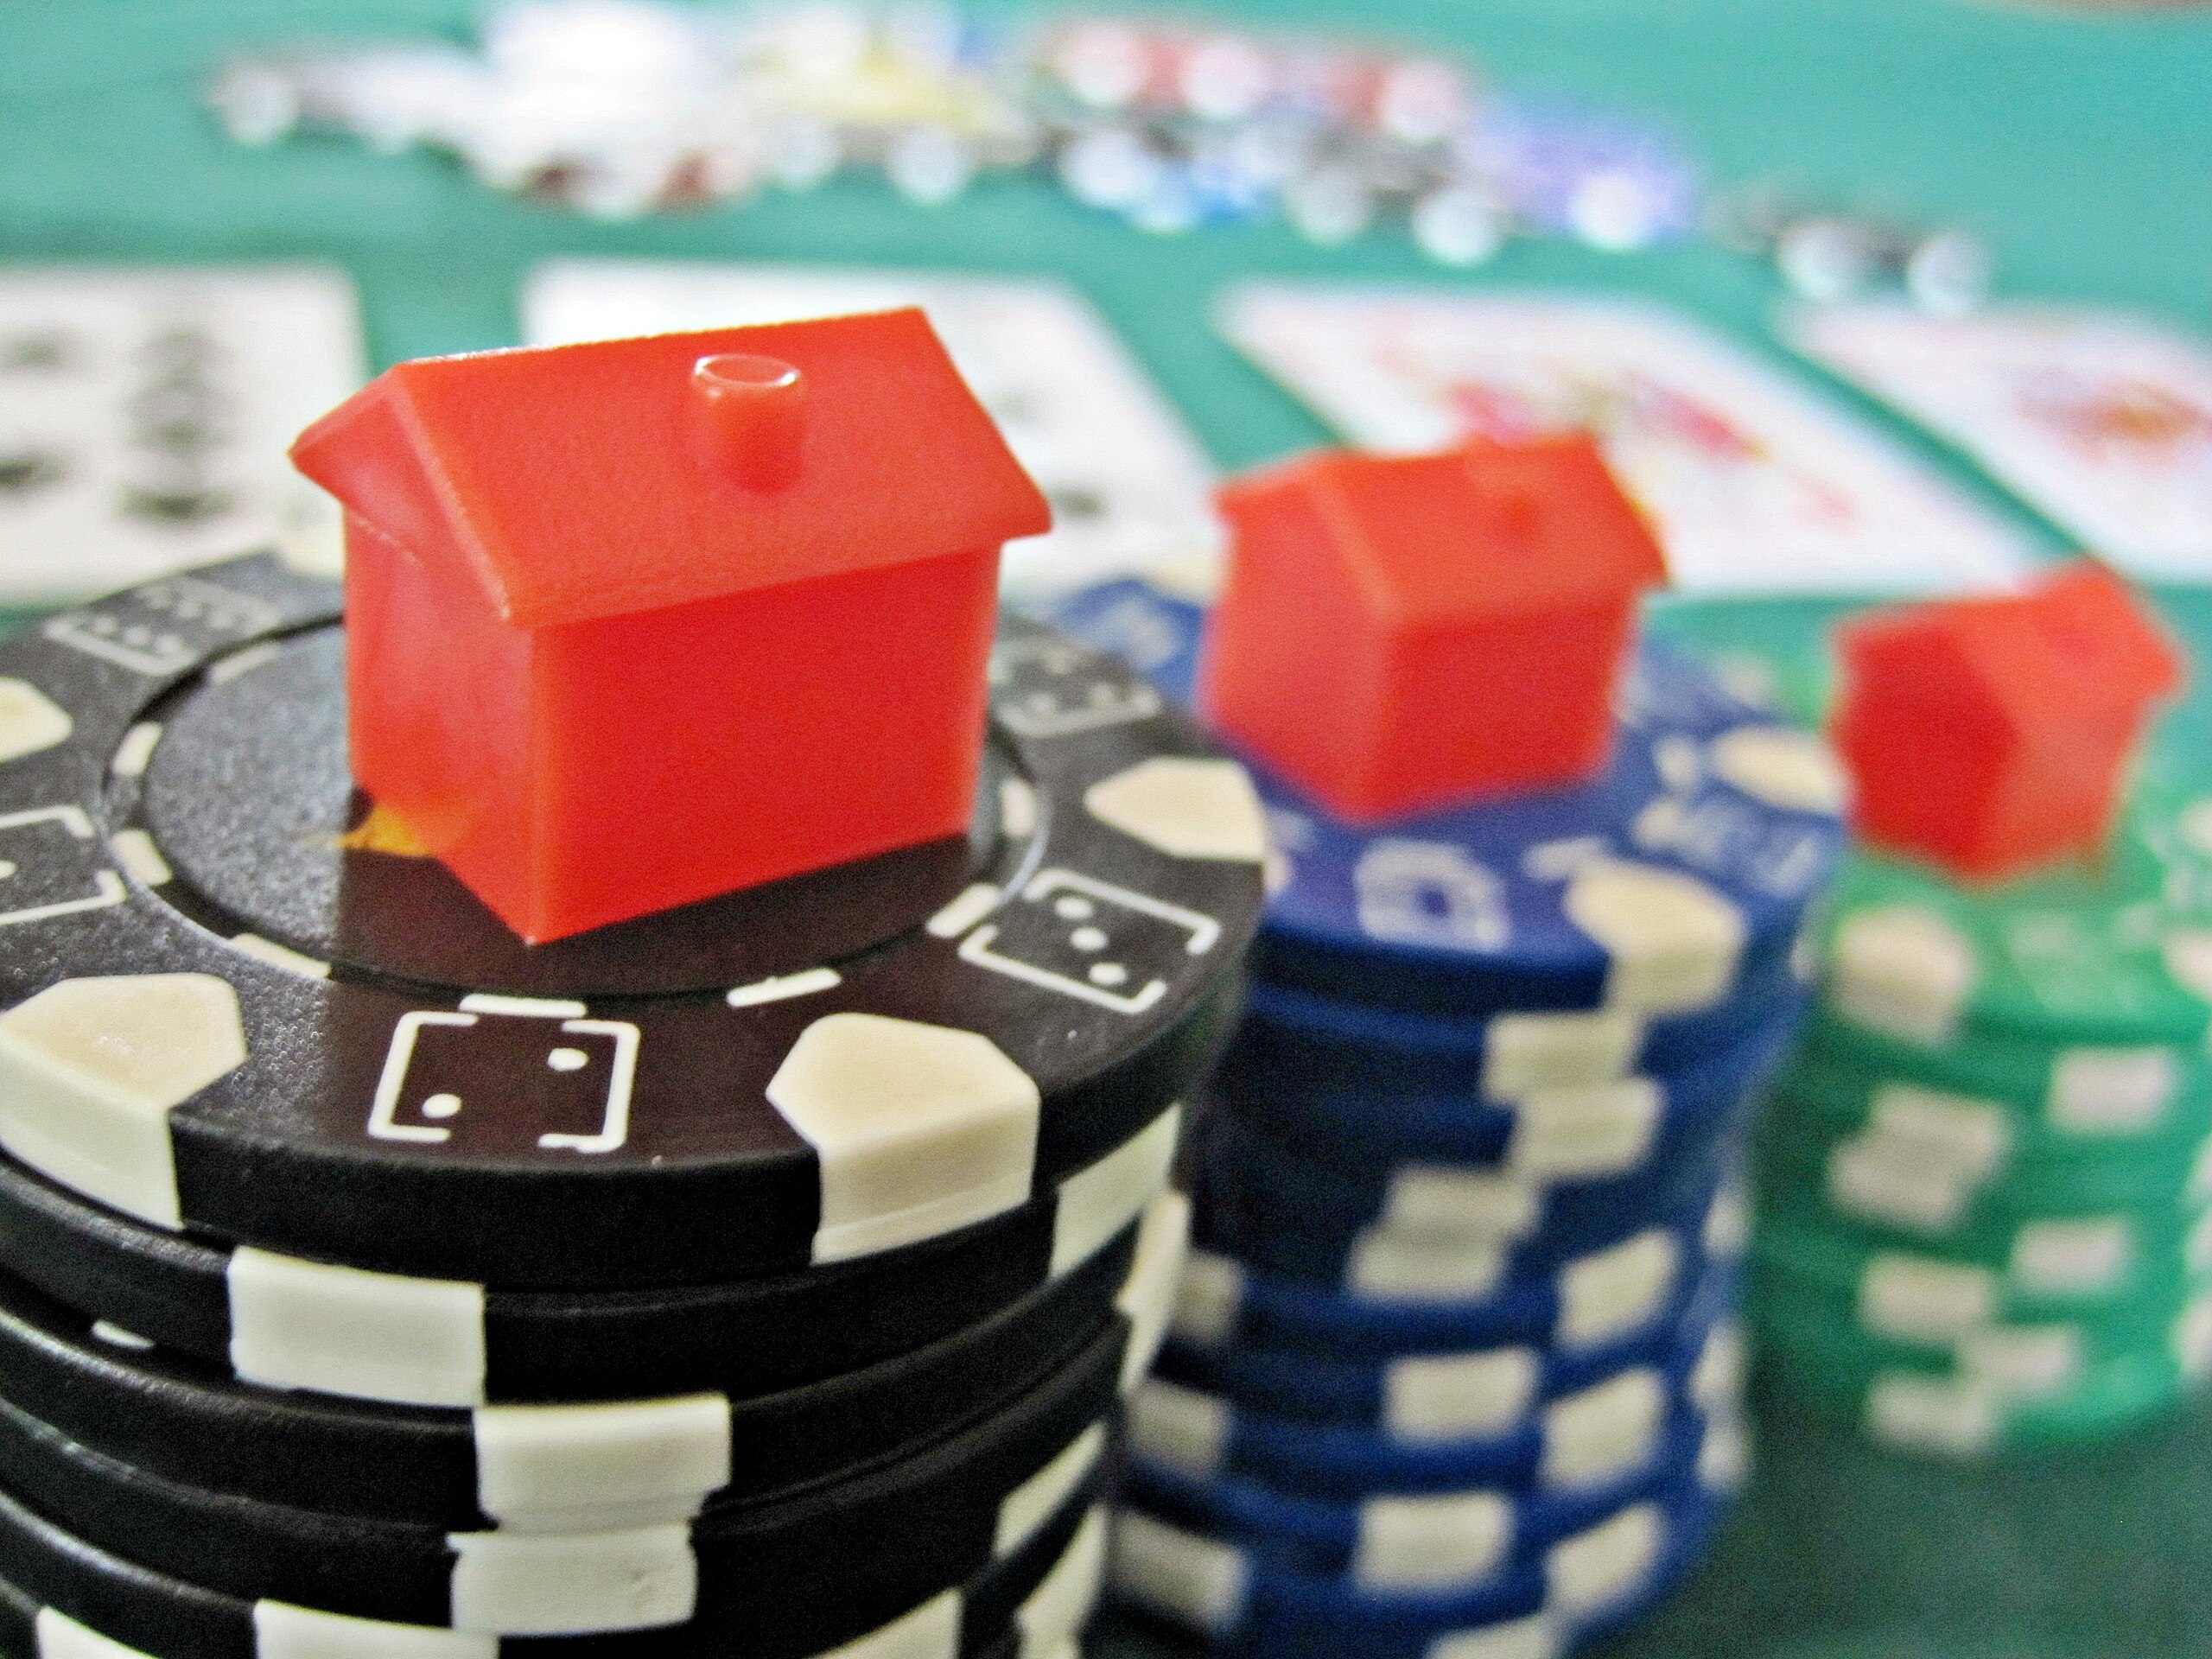 2560px-Monopoly_houses_and_poker_chips.jpg